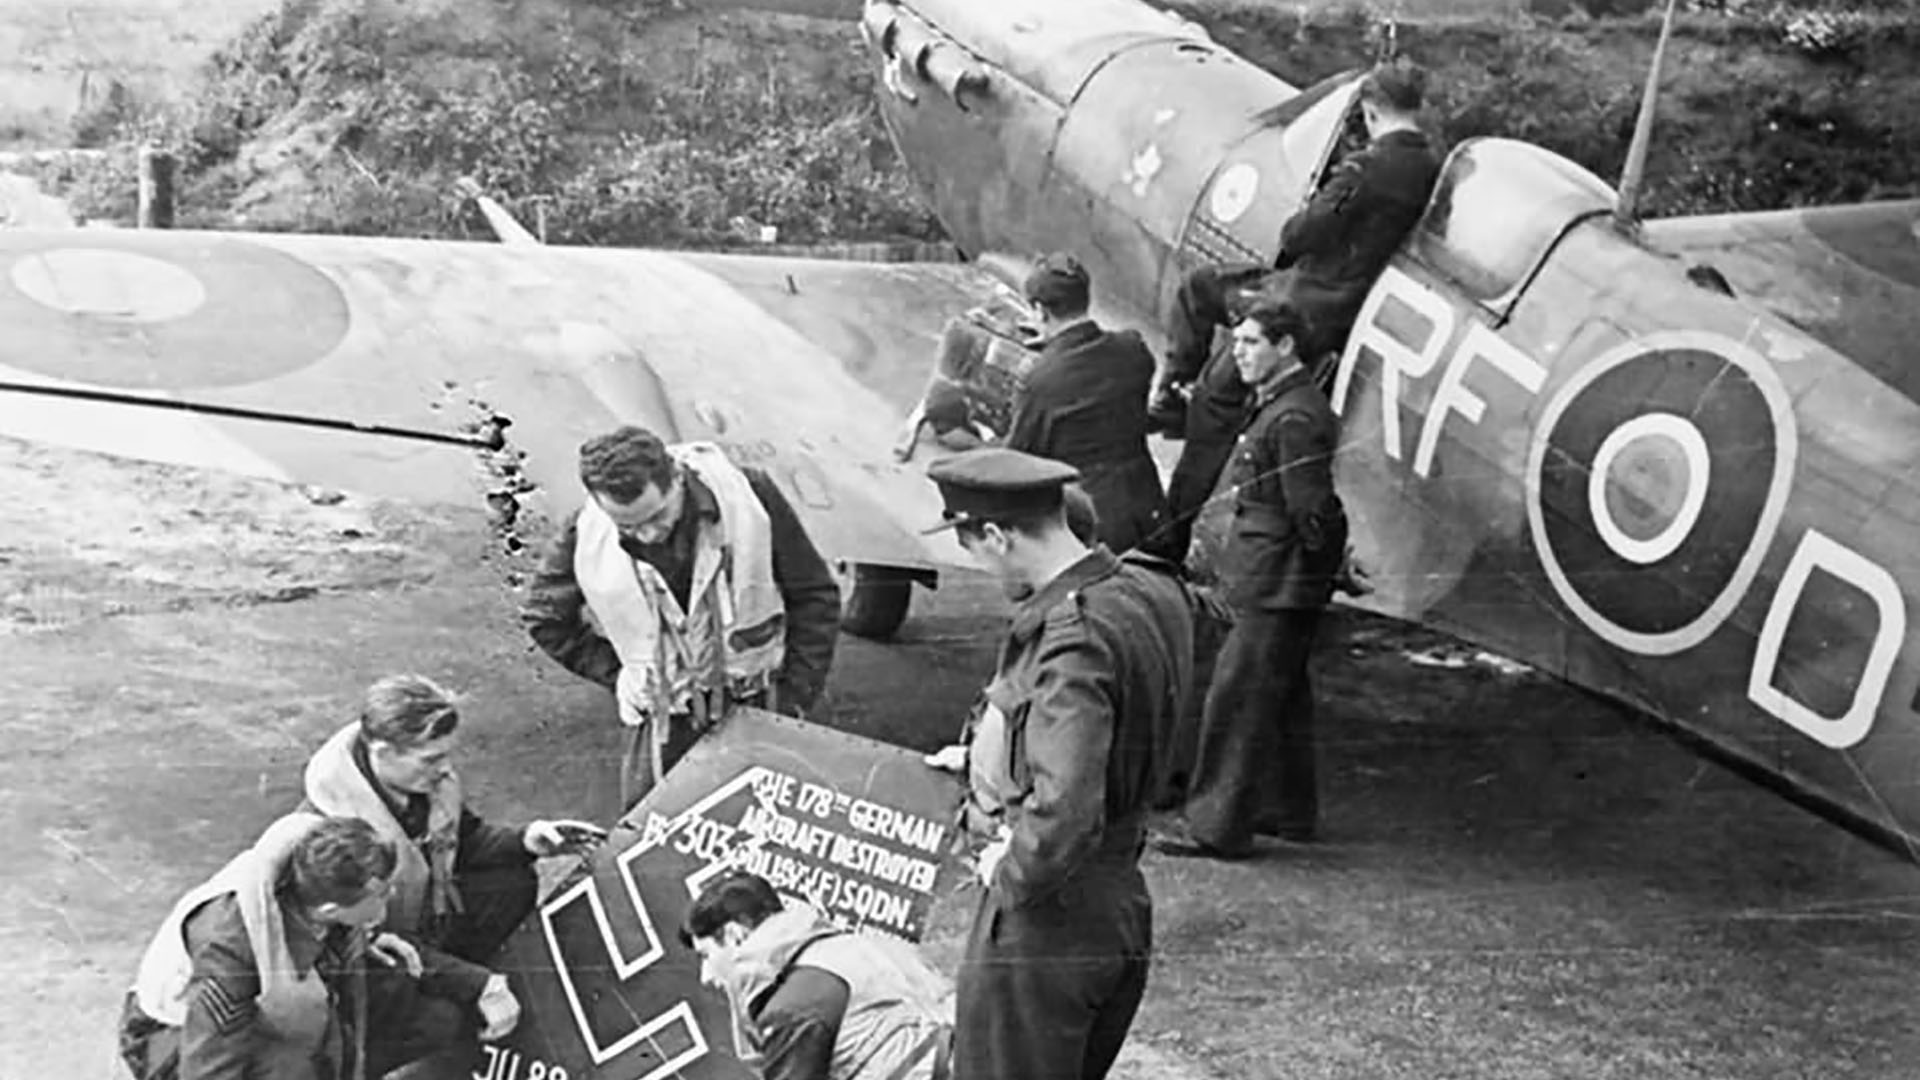 A posed Royal Air Force image showing men from R.A.F. (Kościuszko )303 Squadron marking off the destruction of their 178th enemy plane. This pictured Supermarine Spitfire V BM144 would later crash land near Bangor, Co. Down.